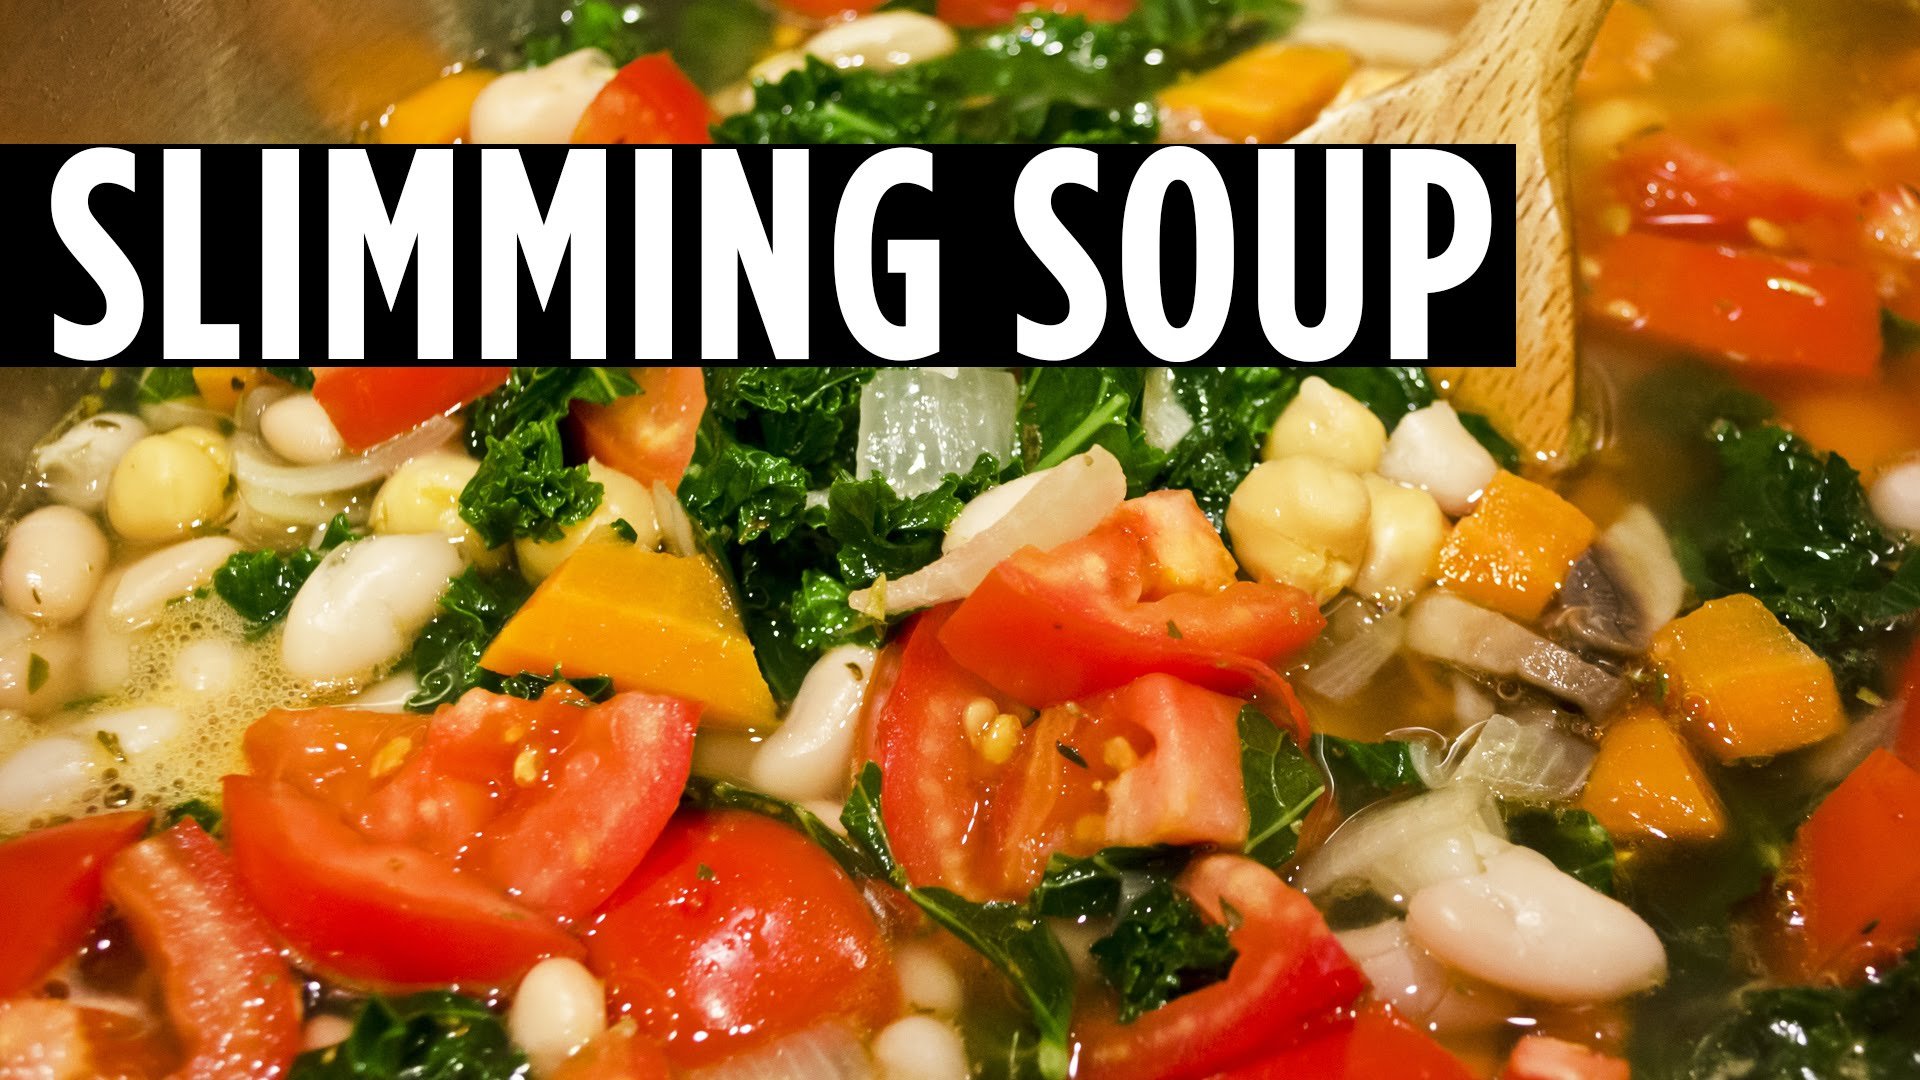 Lose Weight With This Slimming Soup Recipe (7 Day Diet Plan)